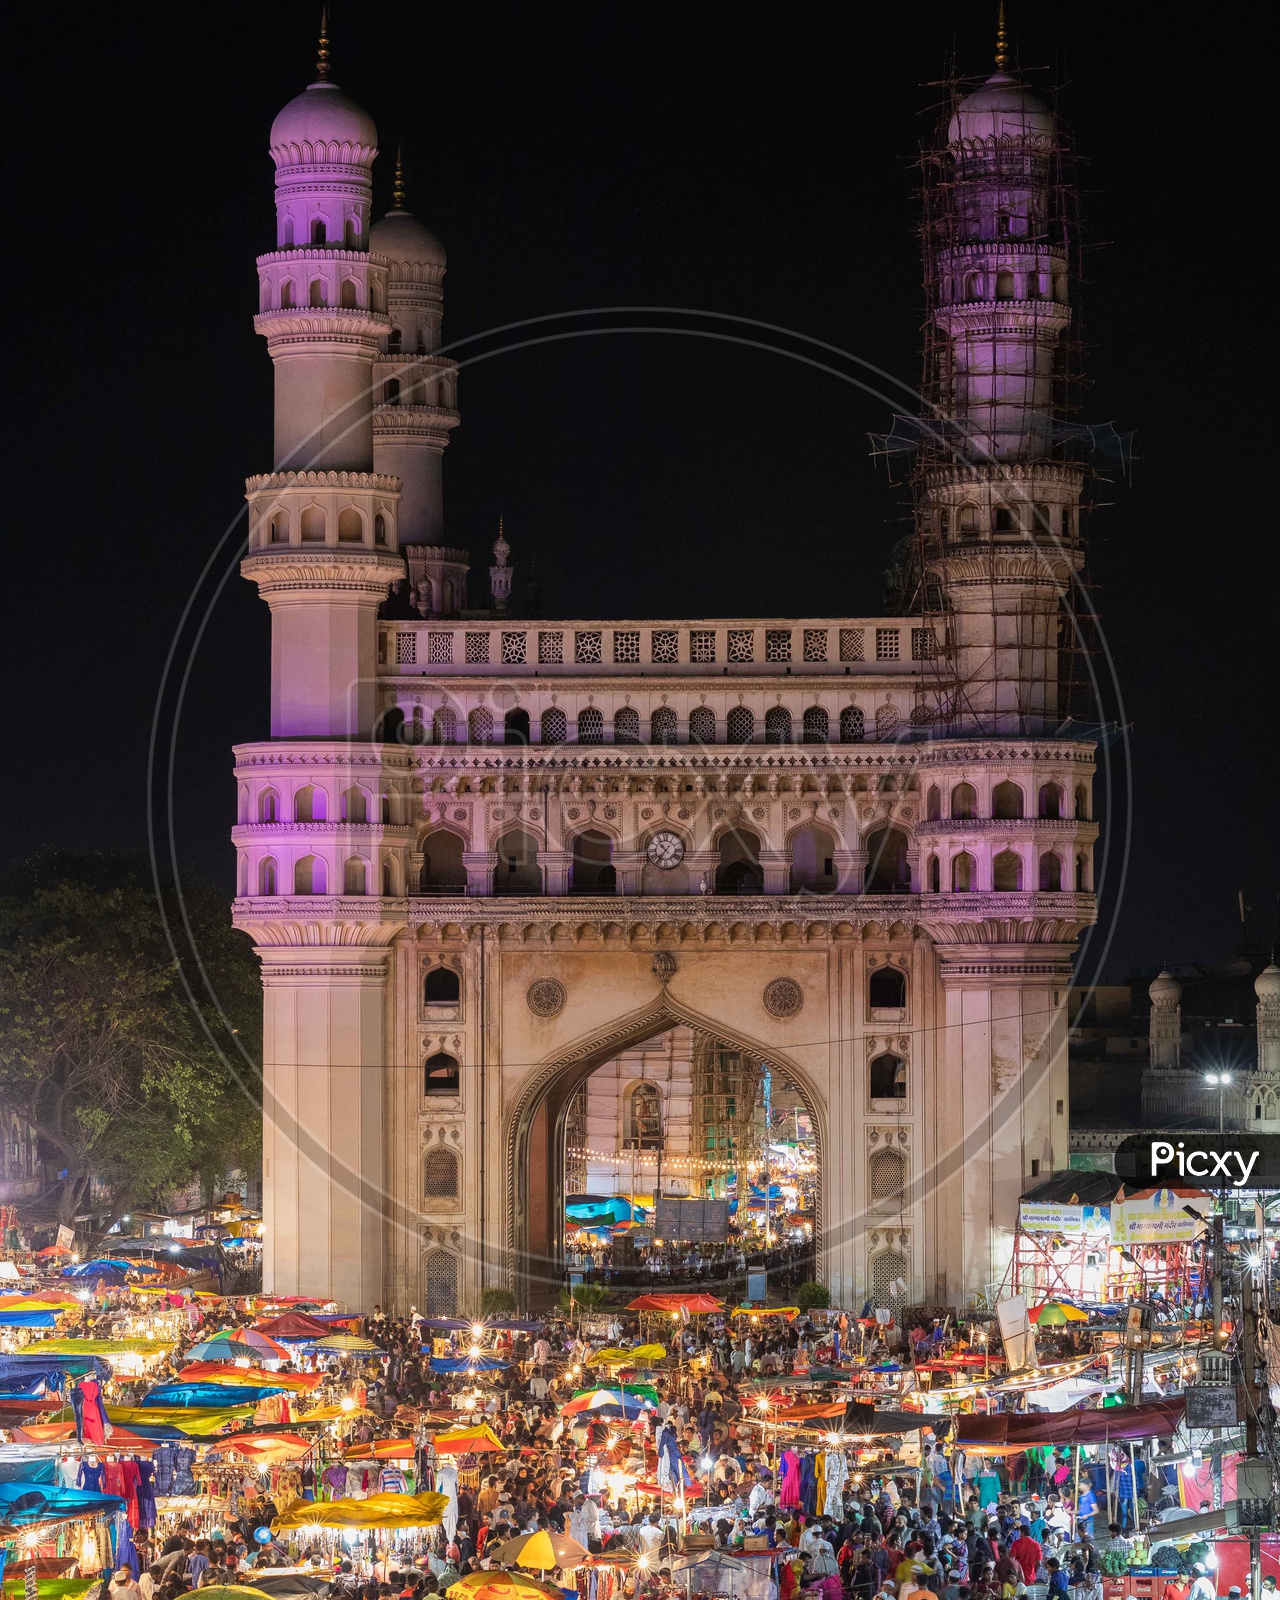 Street bazaar crowd during night with Charminar in the background